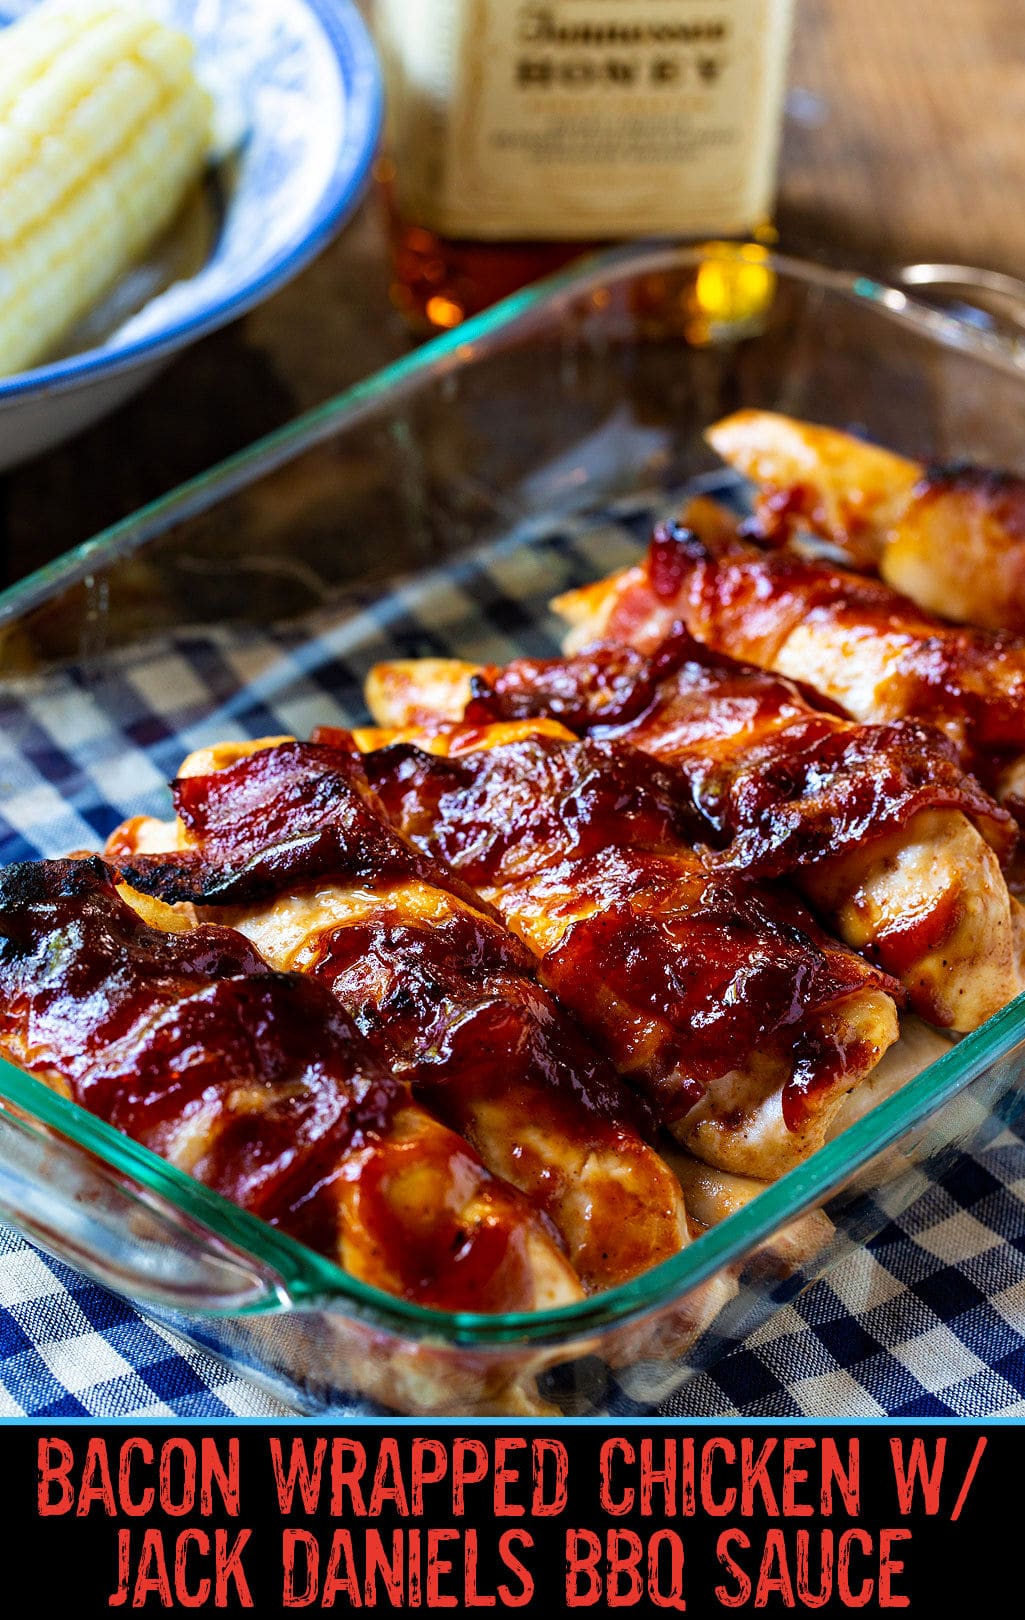 Bacon Wrapped Chicken with Jack Daniels BBQ Sauce in 9x13-inch baking dish.